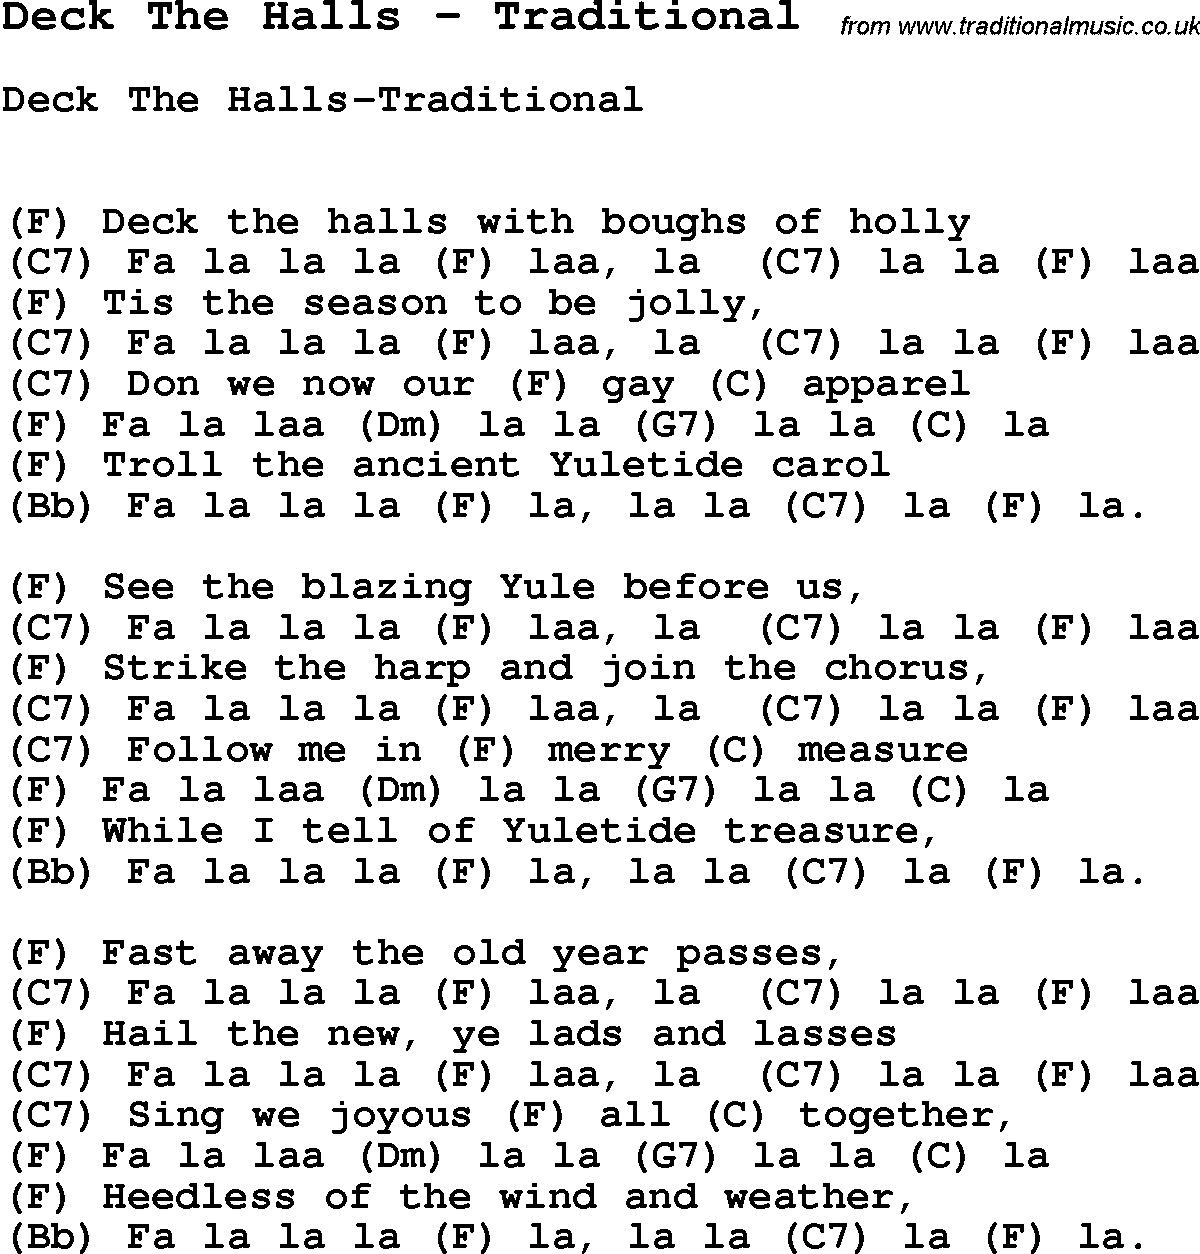 Song Deck The Halls by Traditional, song lyric for vocal performance